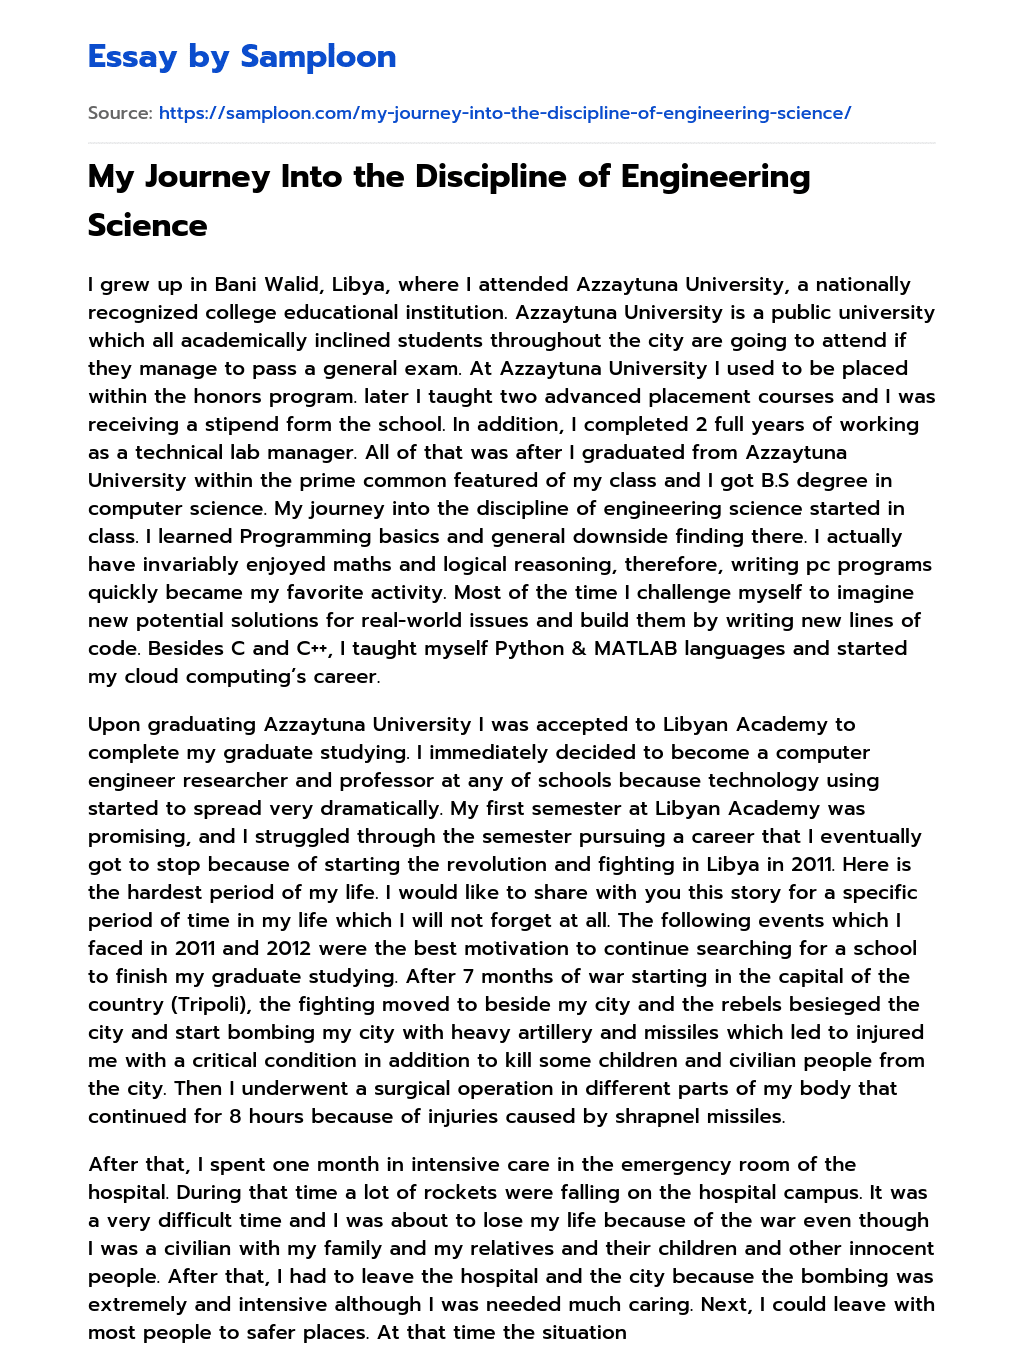 My Journey Into the Discipline of Engineering Science essay